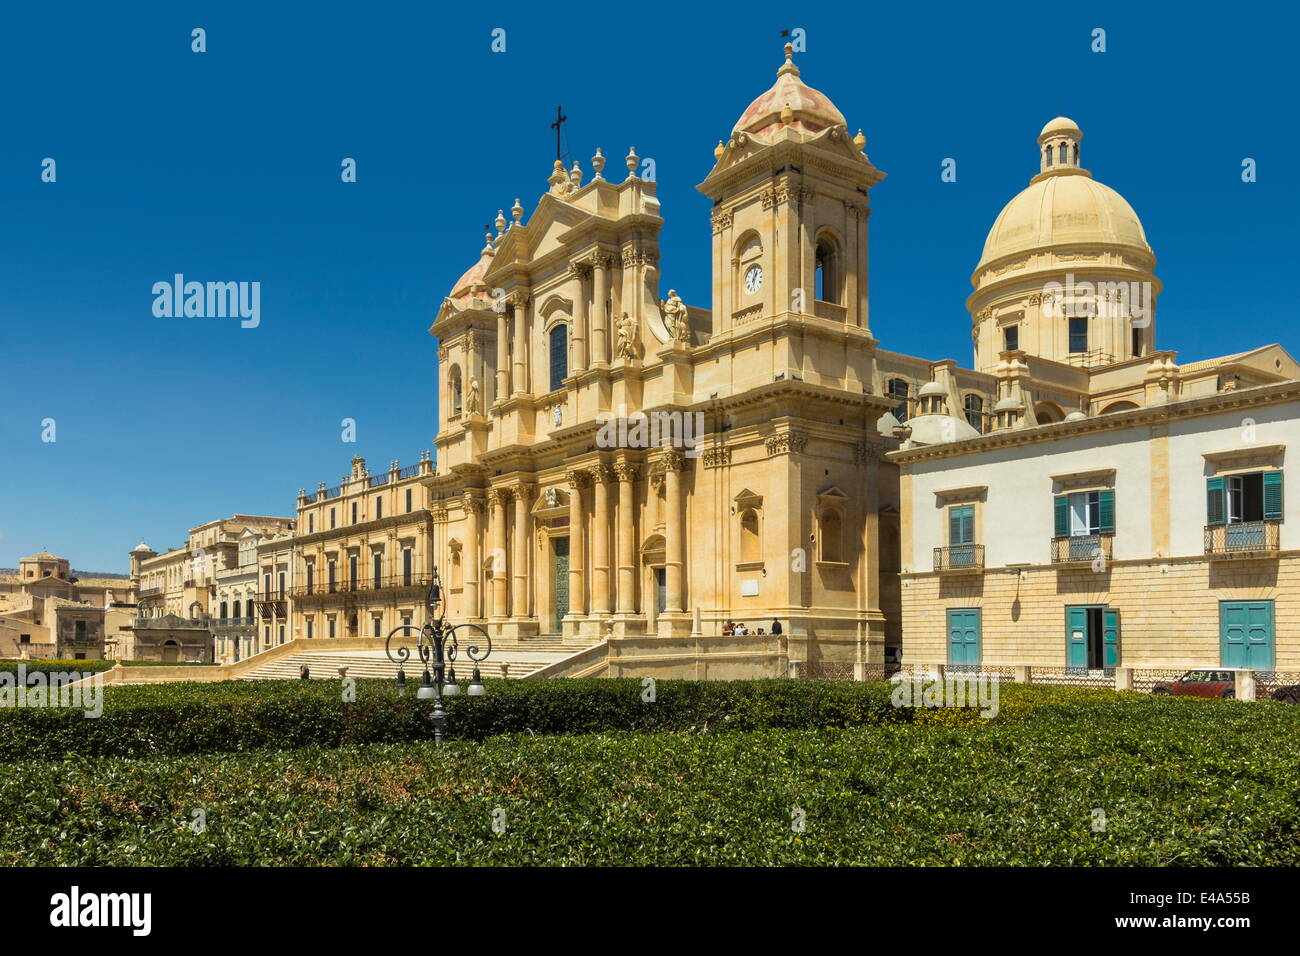 The 17th century Cathedral, collapsed in 1996 and rebuilt, at Noto, famed for Baroque architecture, UNESCO, Noto, Sicily, Italy Stock Photo